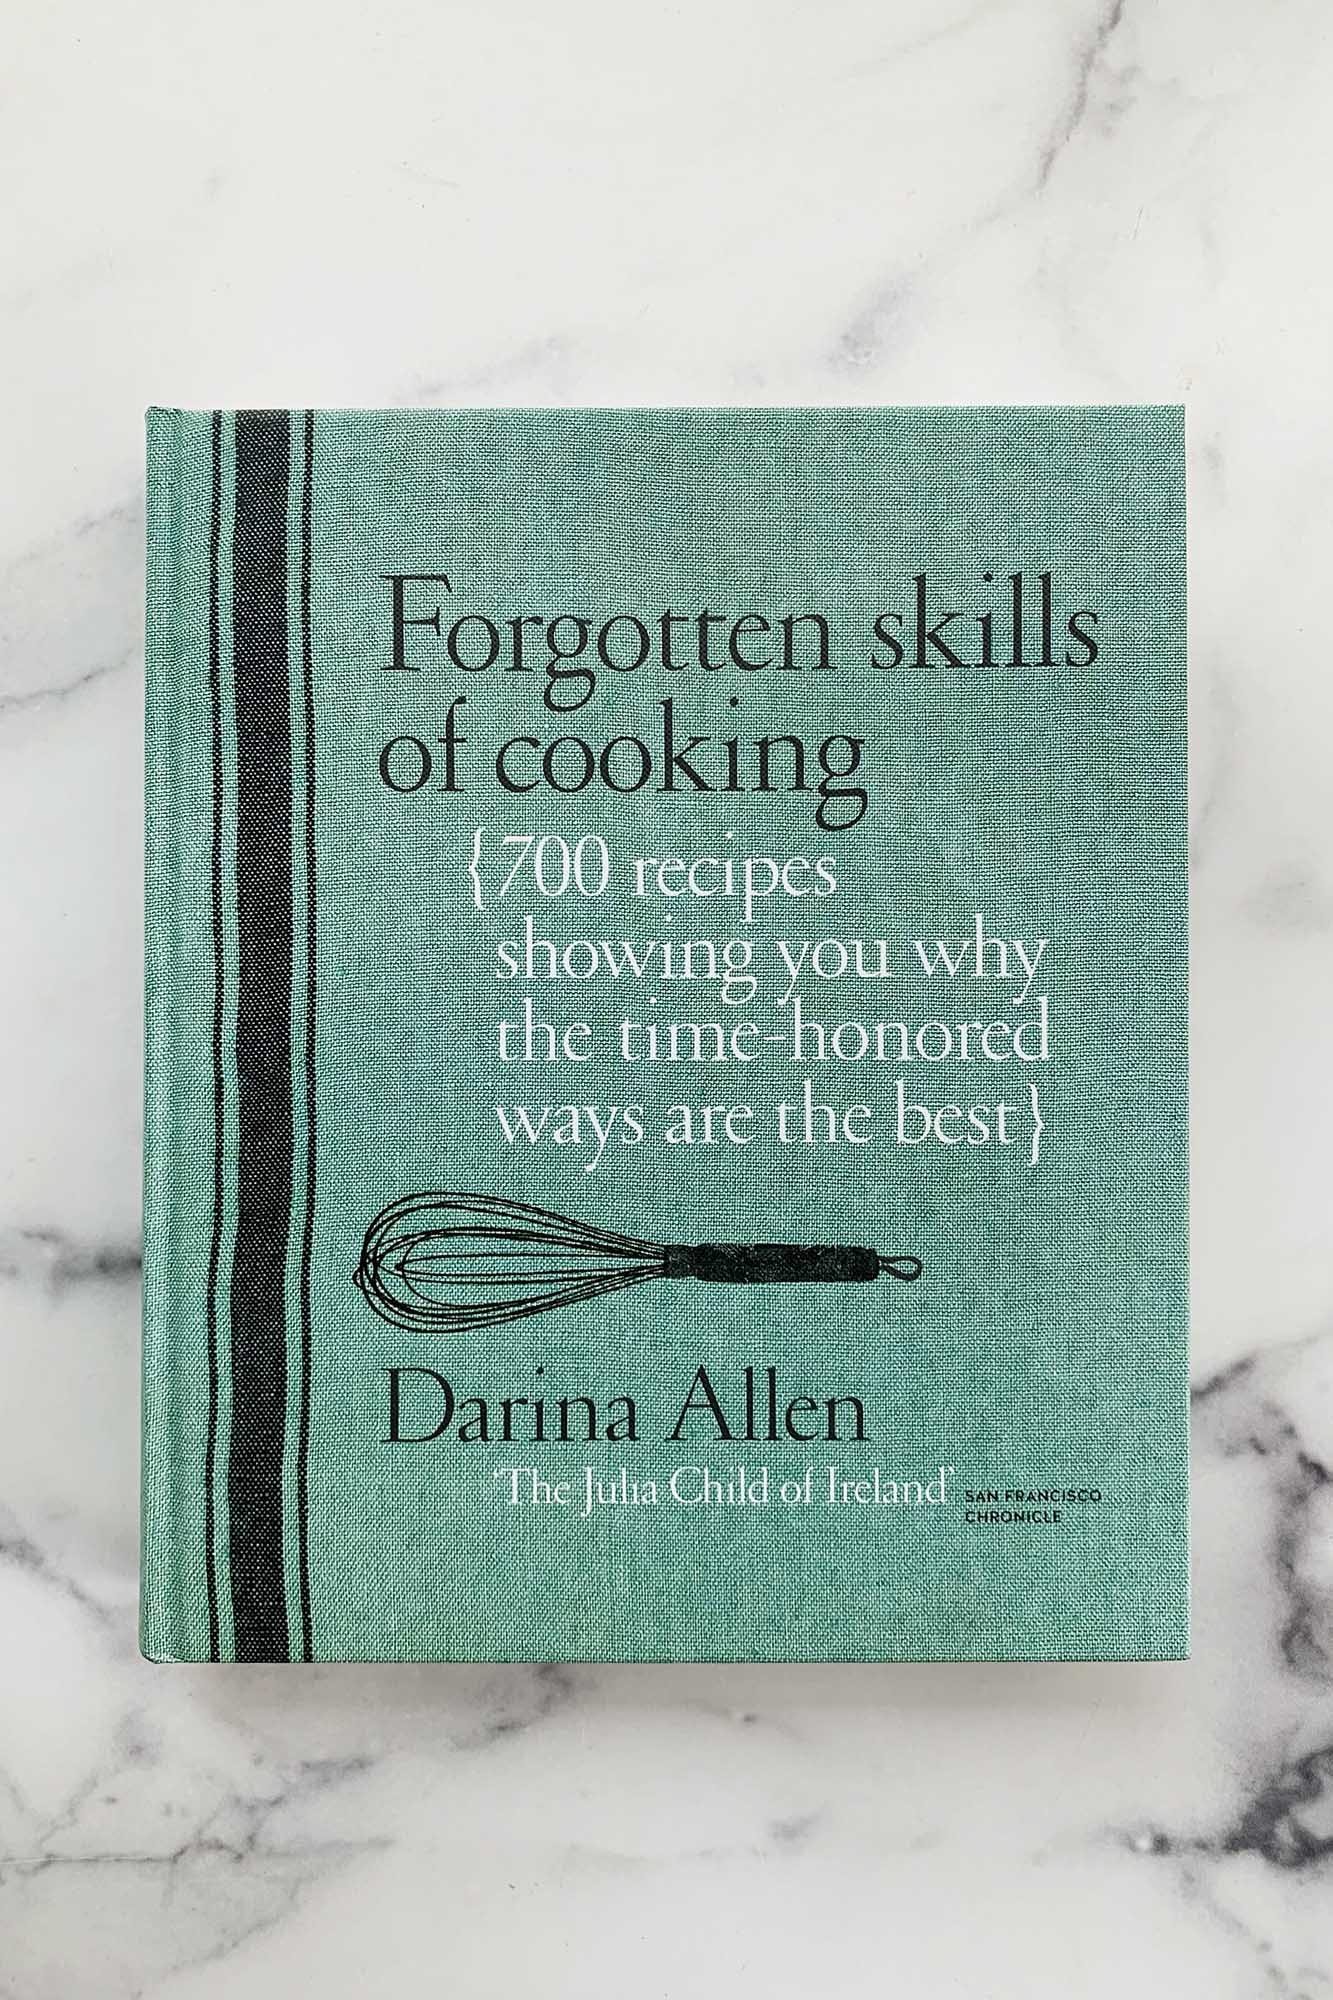 The Forgotten Skills of Cooking – Providore Fine Foods